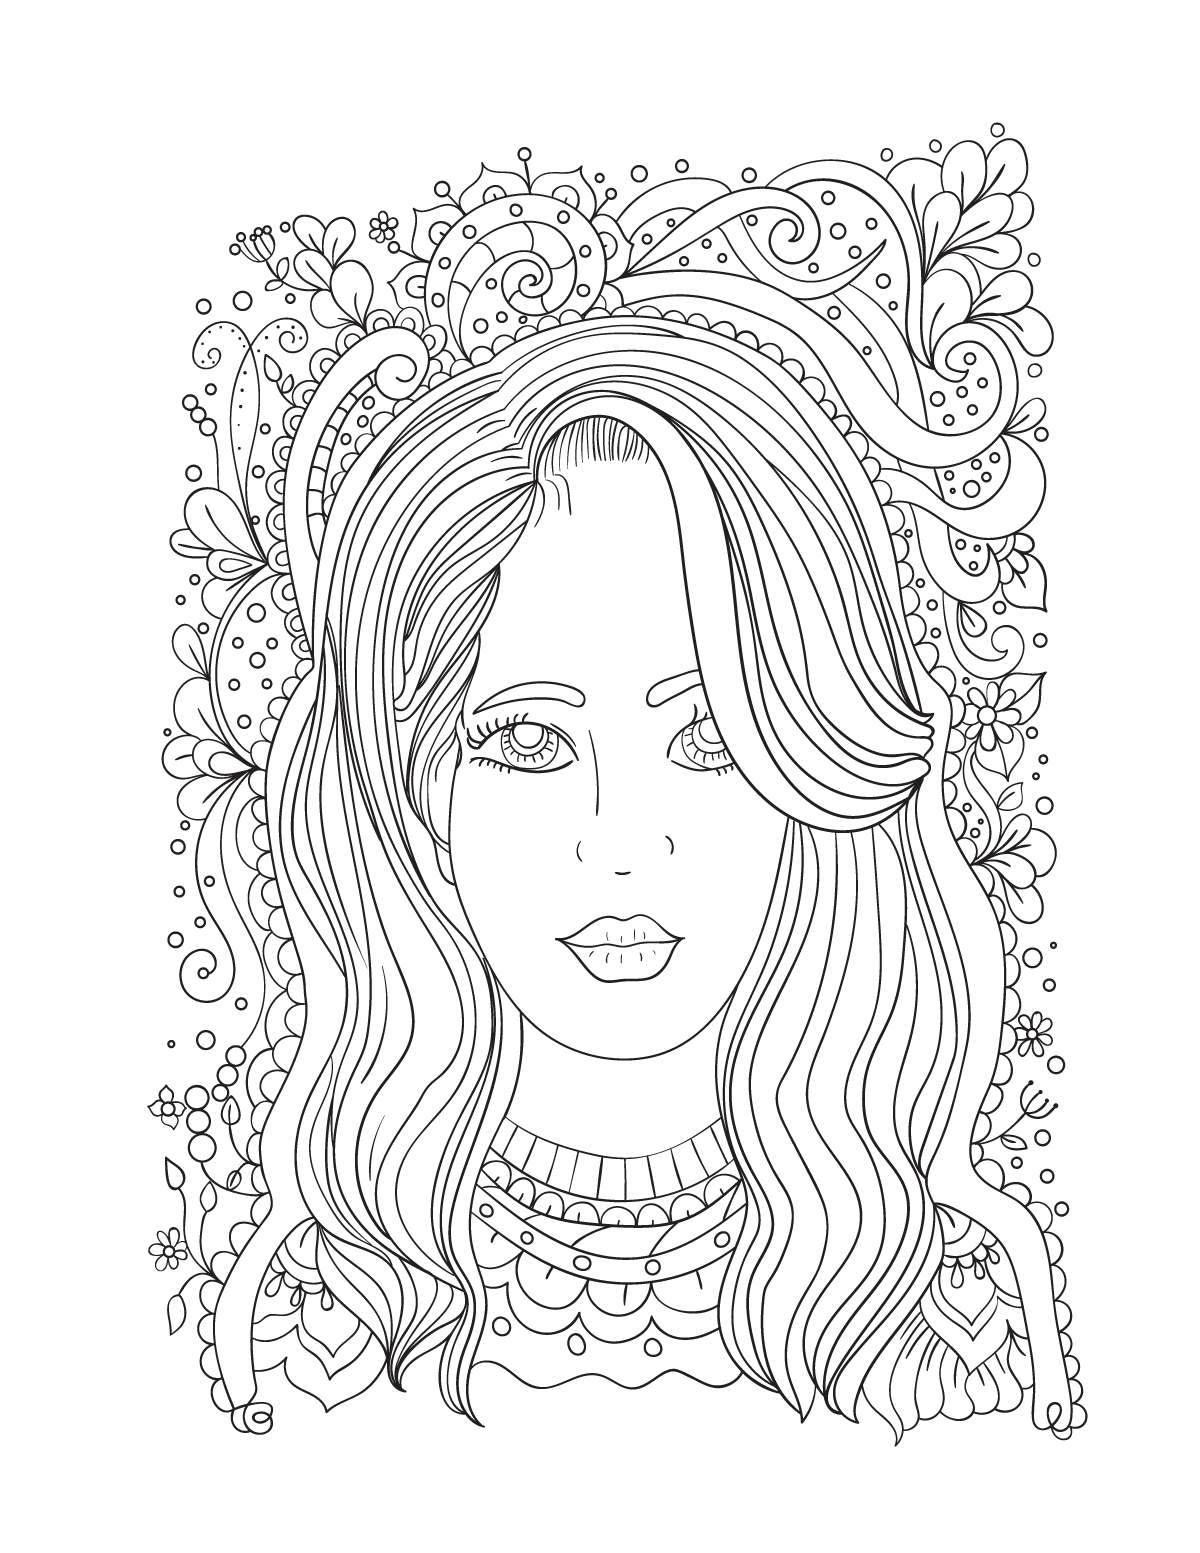 Download Digital Coloring Book Pages Girls And Flowers Vol 1 By Erikavectorika Thehungryjpeg Com